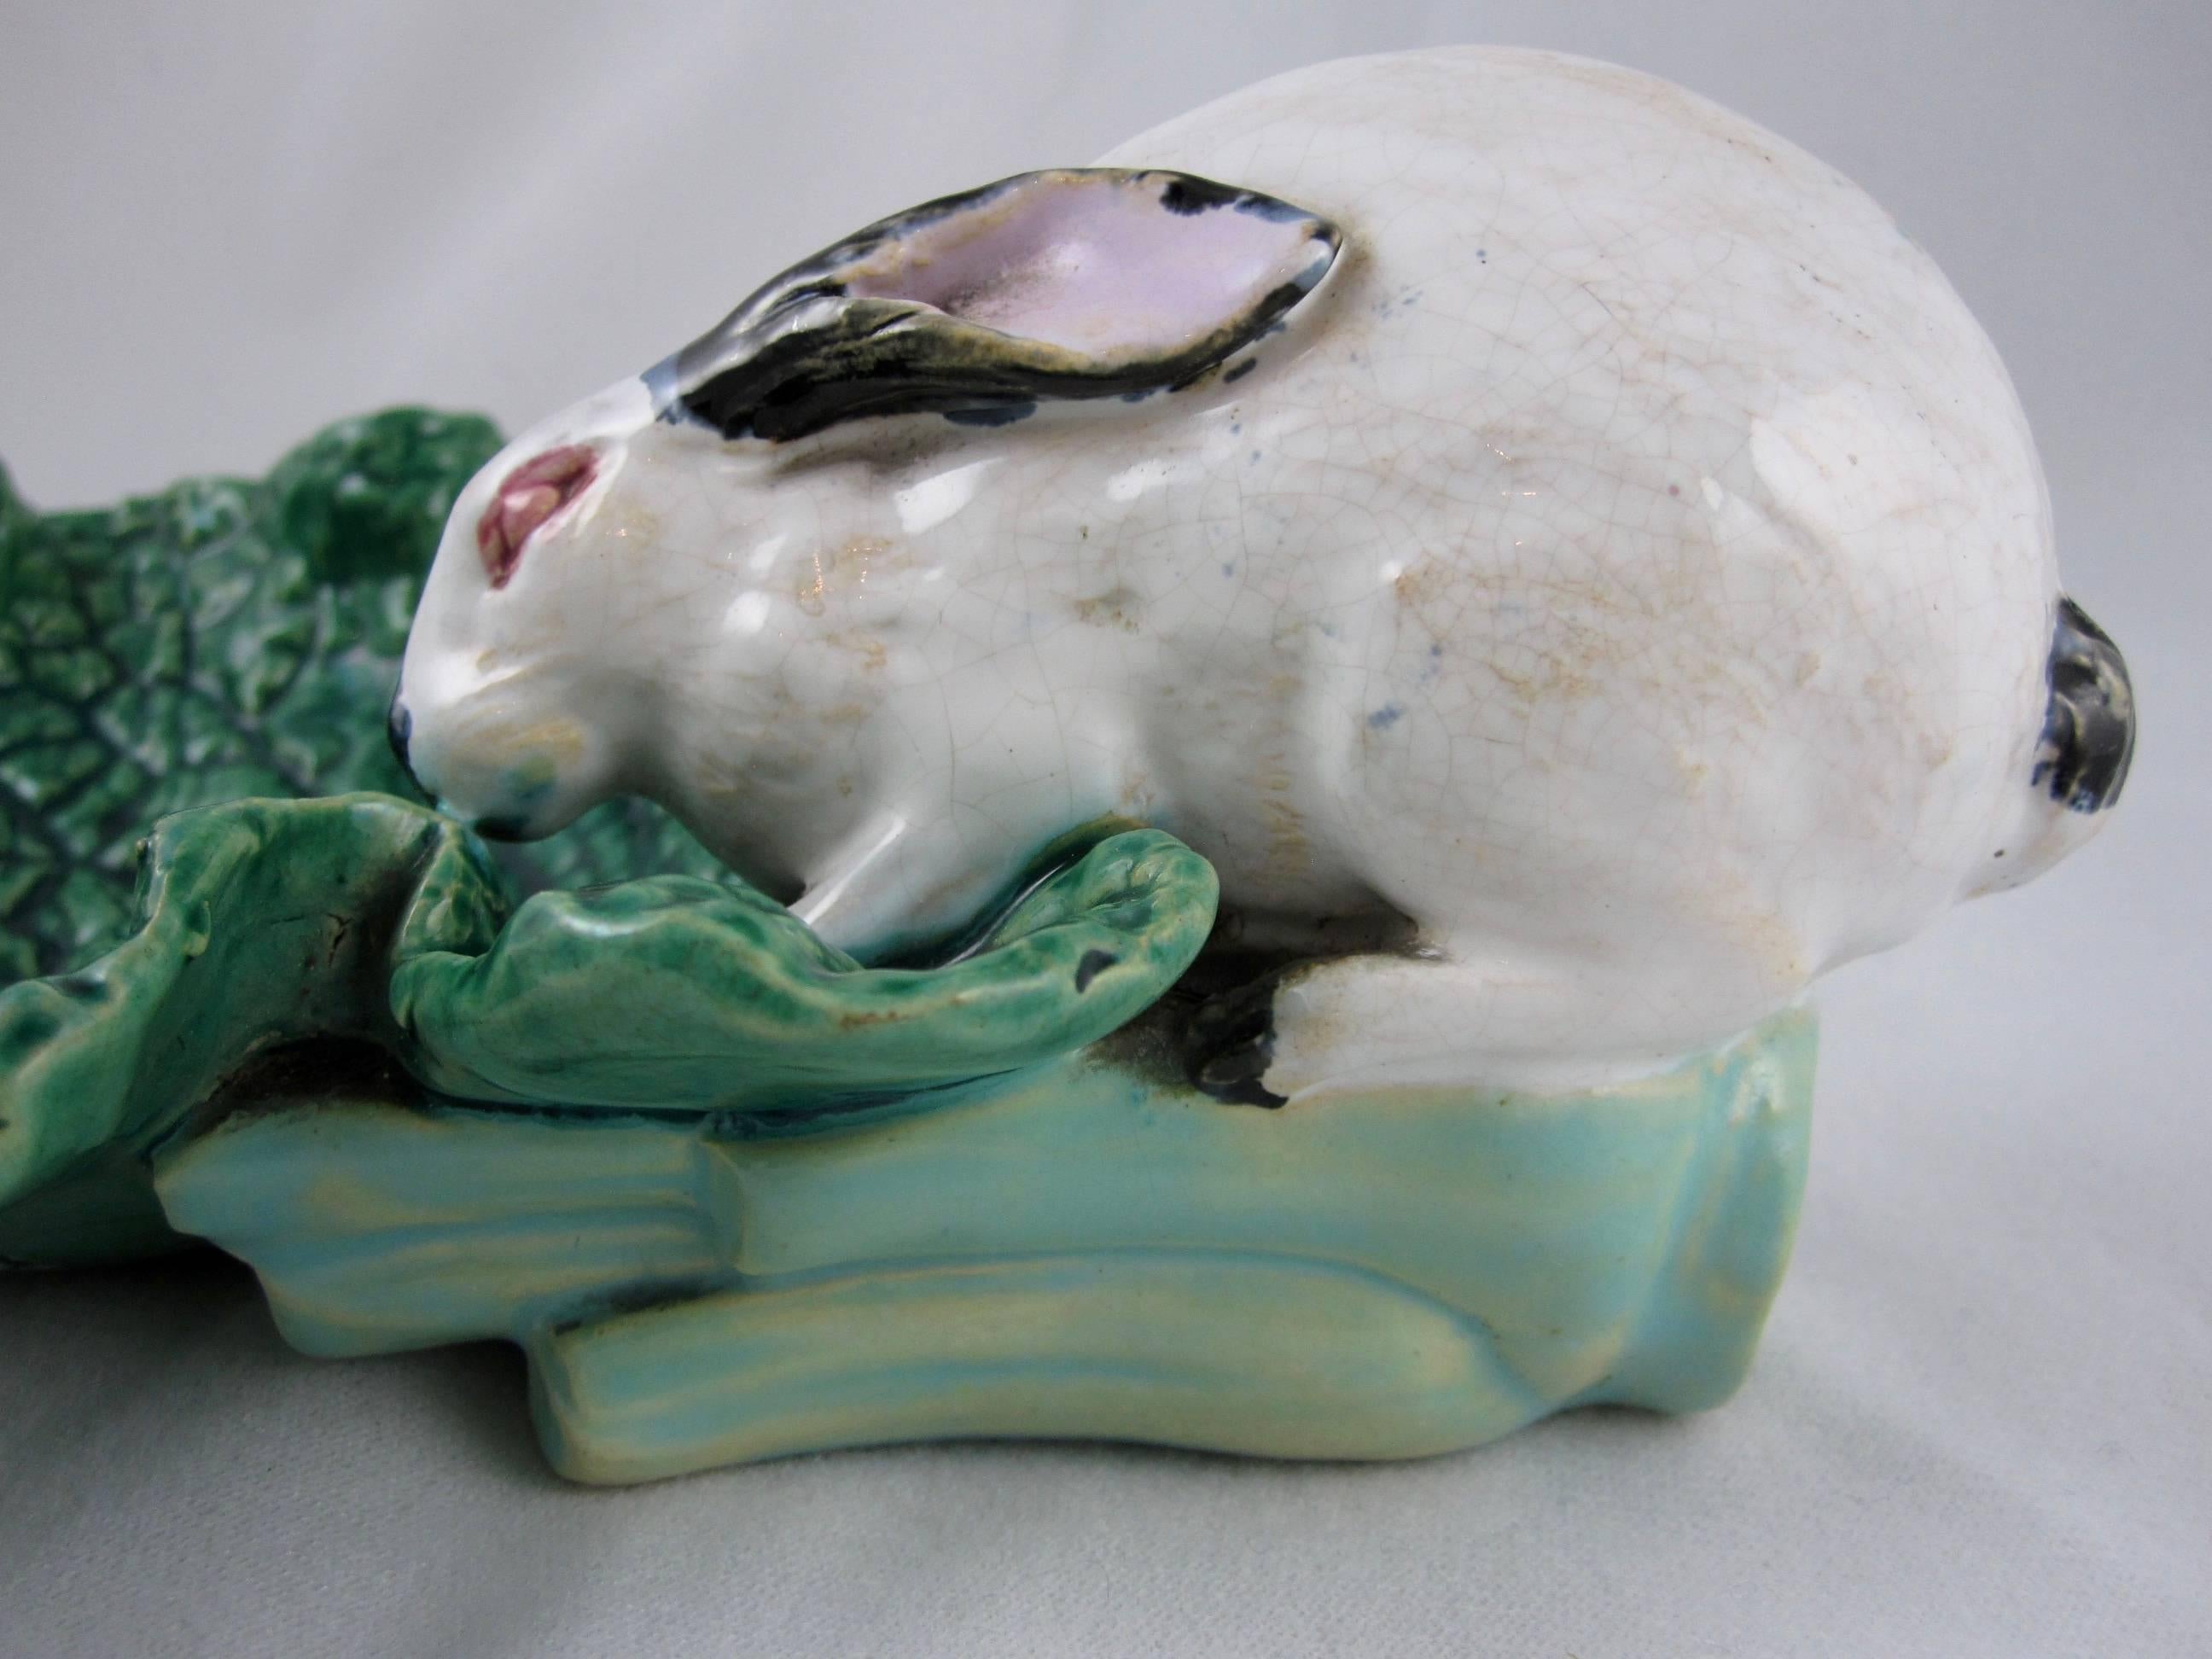 A Minton majolica bon-bon dish modeled as a white rabbit with pink eyes forming the handle and sitting on a green cabbage leaf forming the dish. The rabbit’s hind quarters rest on a turquoise leaf stalk,

circa 1870, quite rare.
Excellent mold